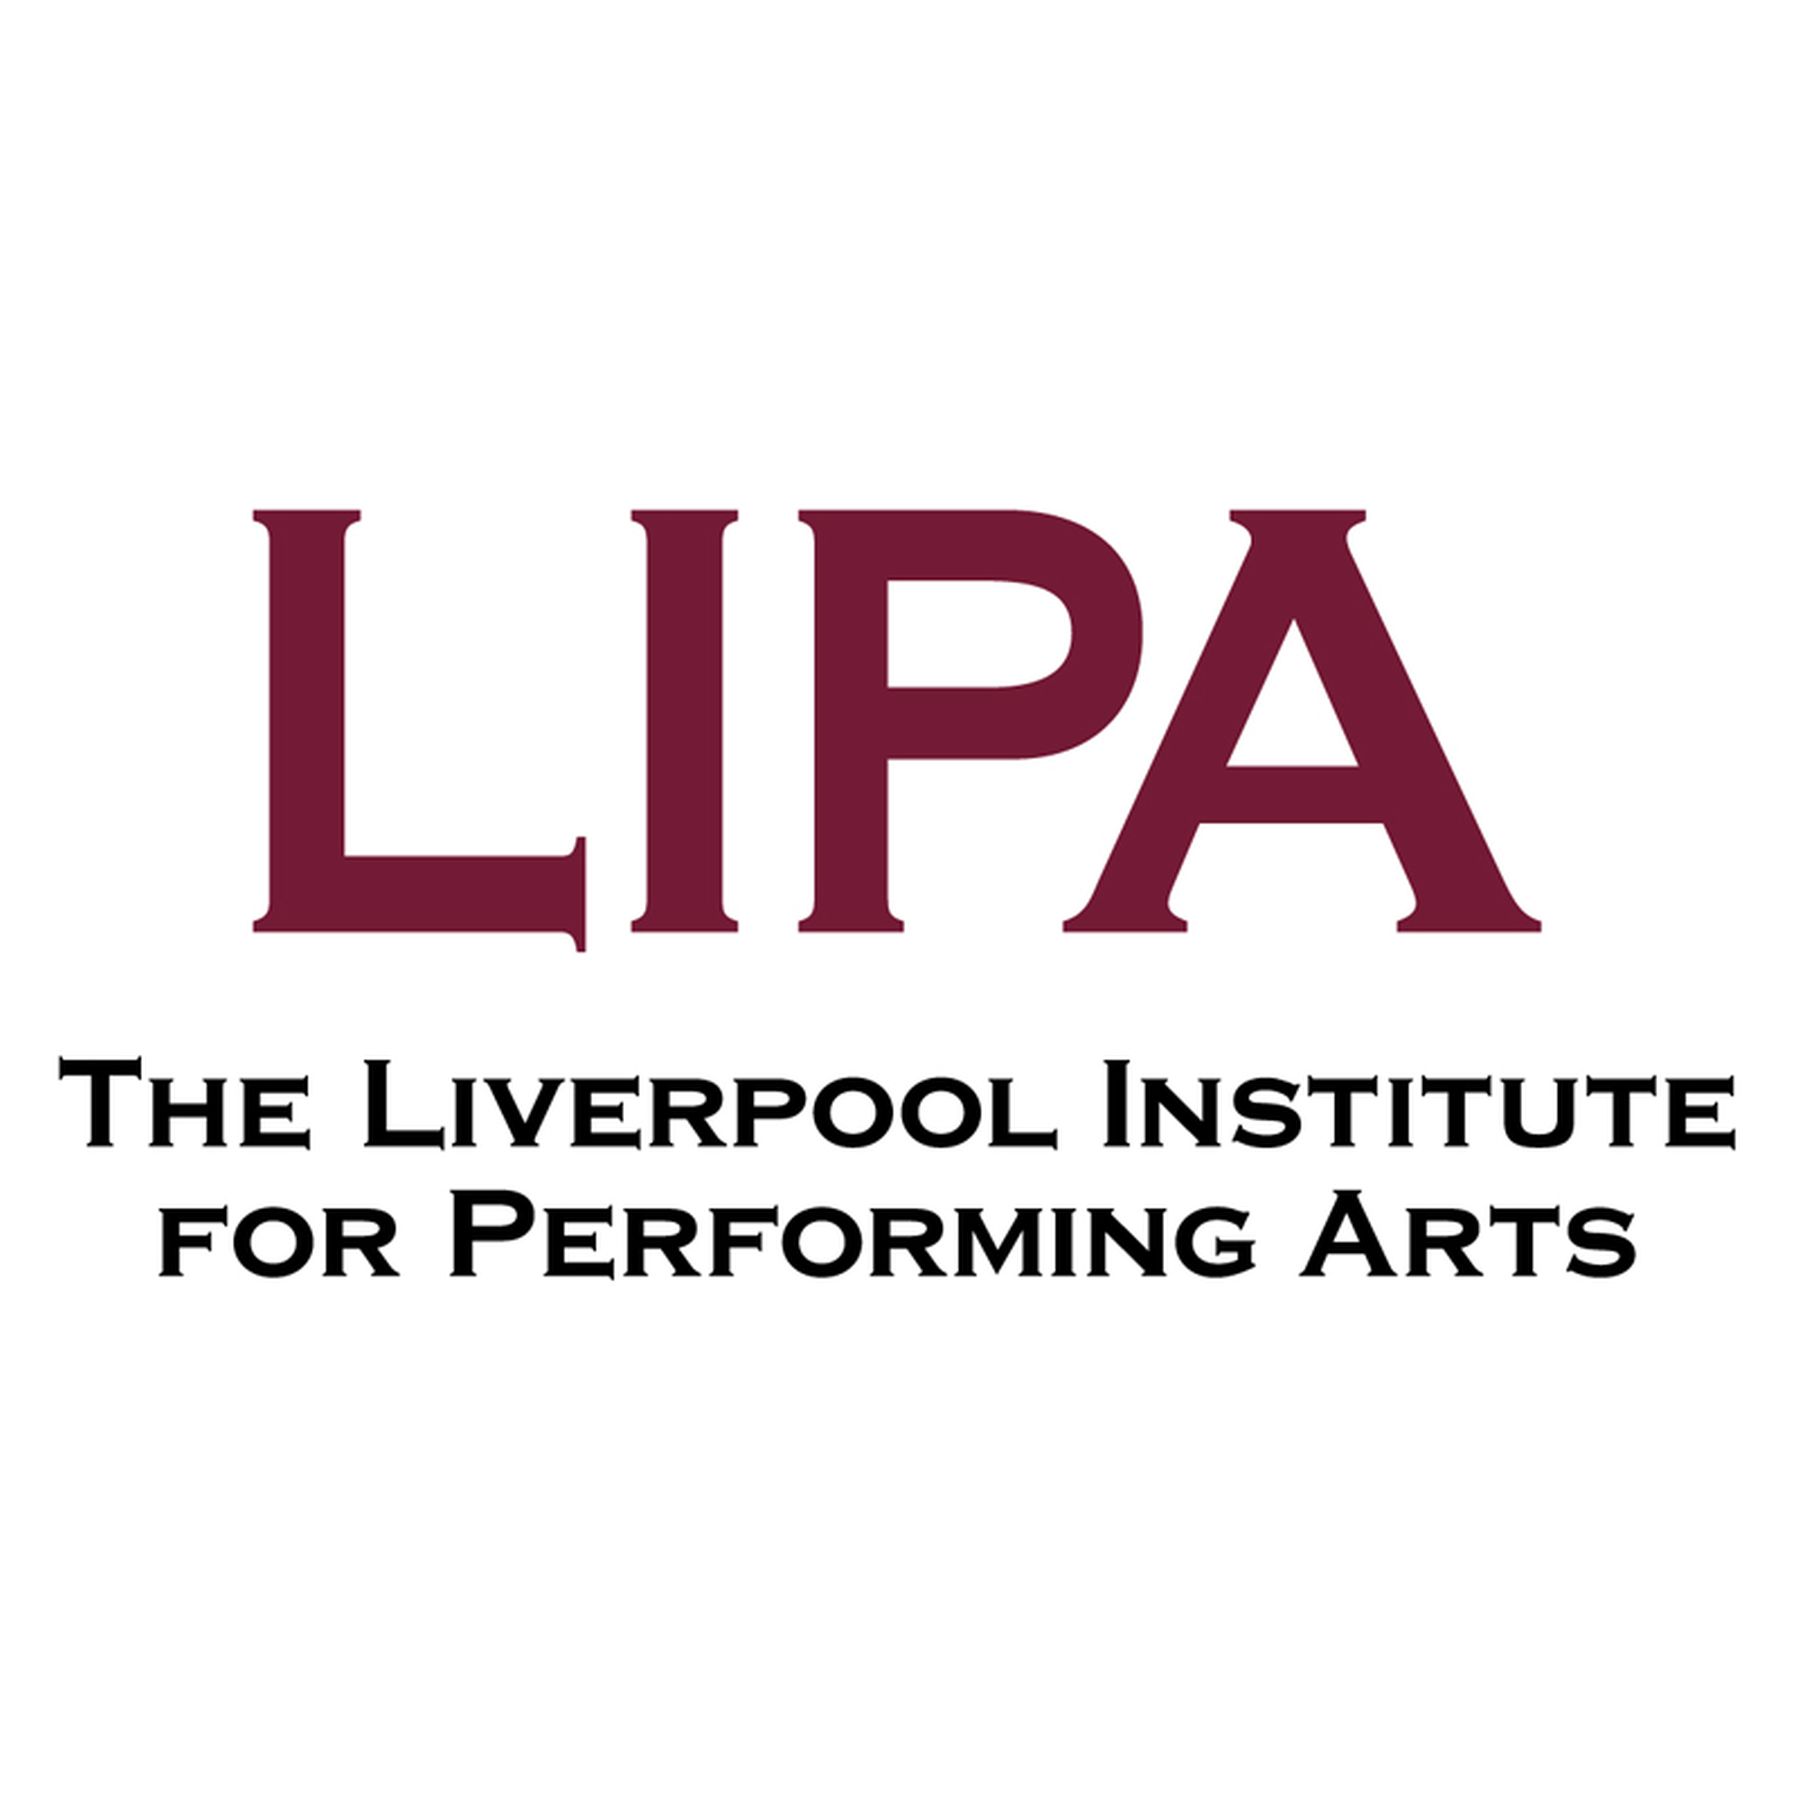 LIPA logo. Reads "LIPA" in red letters, followed by smaller text that says "The Liverpool Institute for Performing Arts"